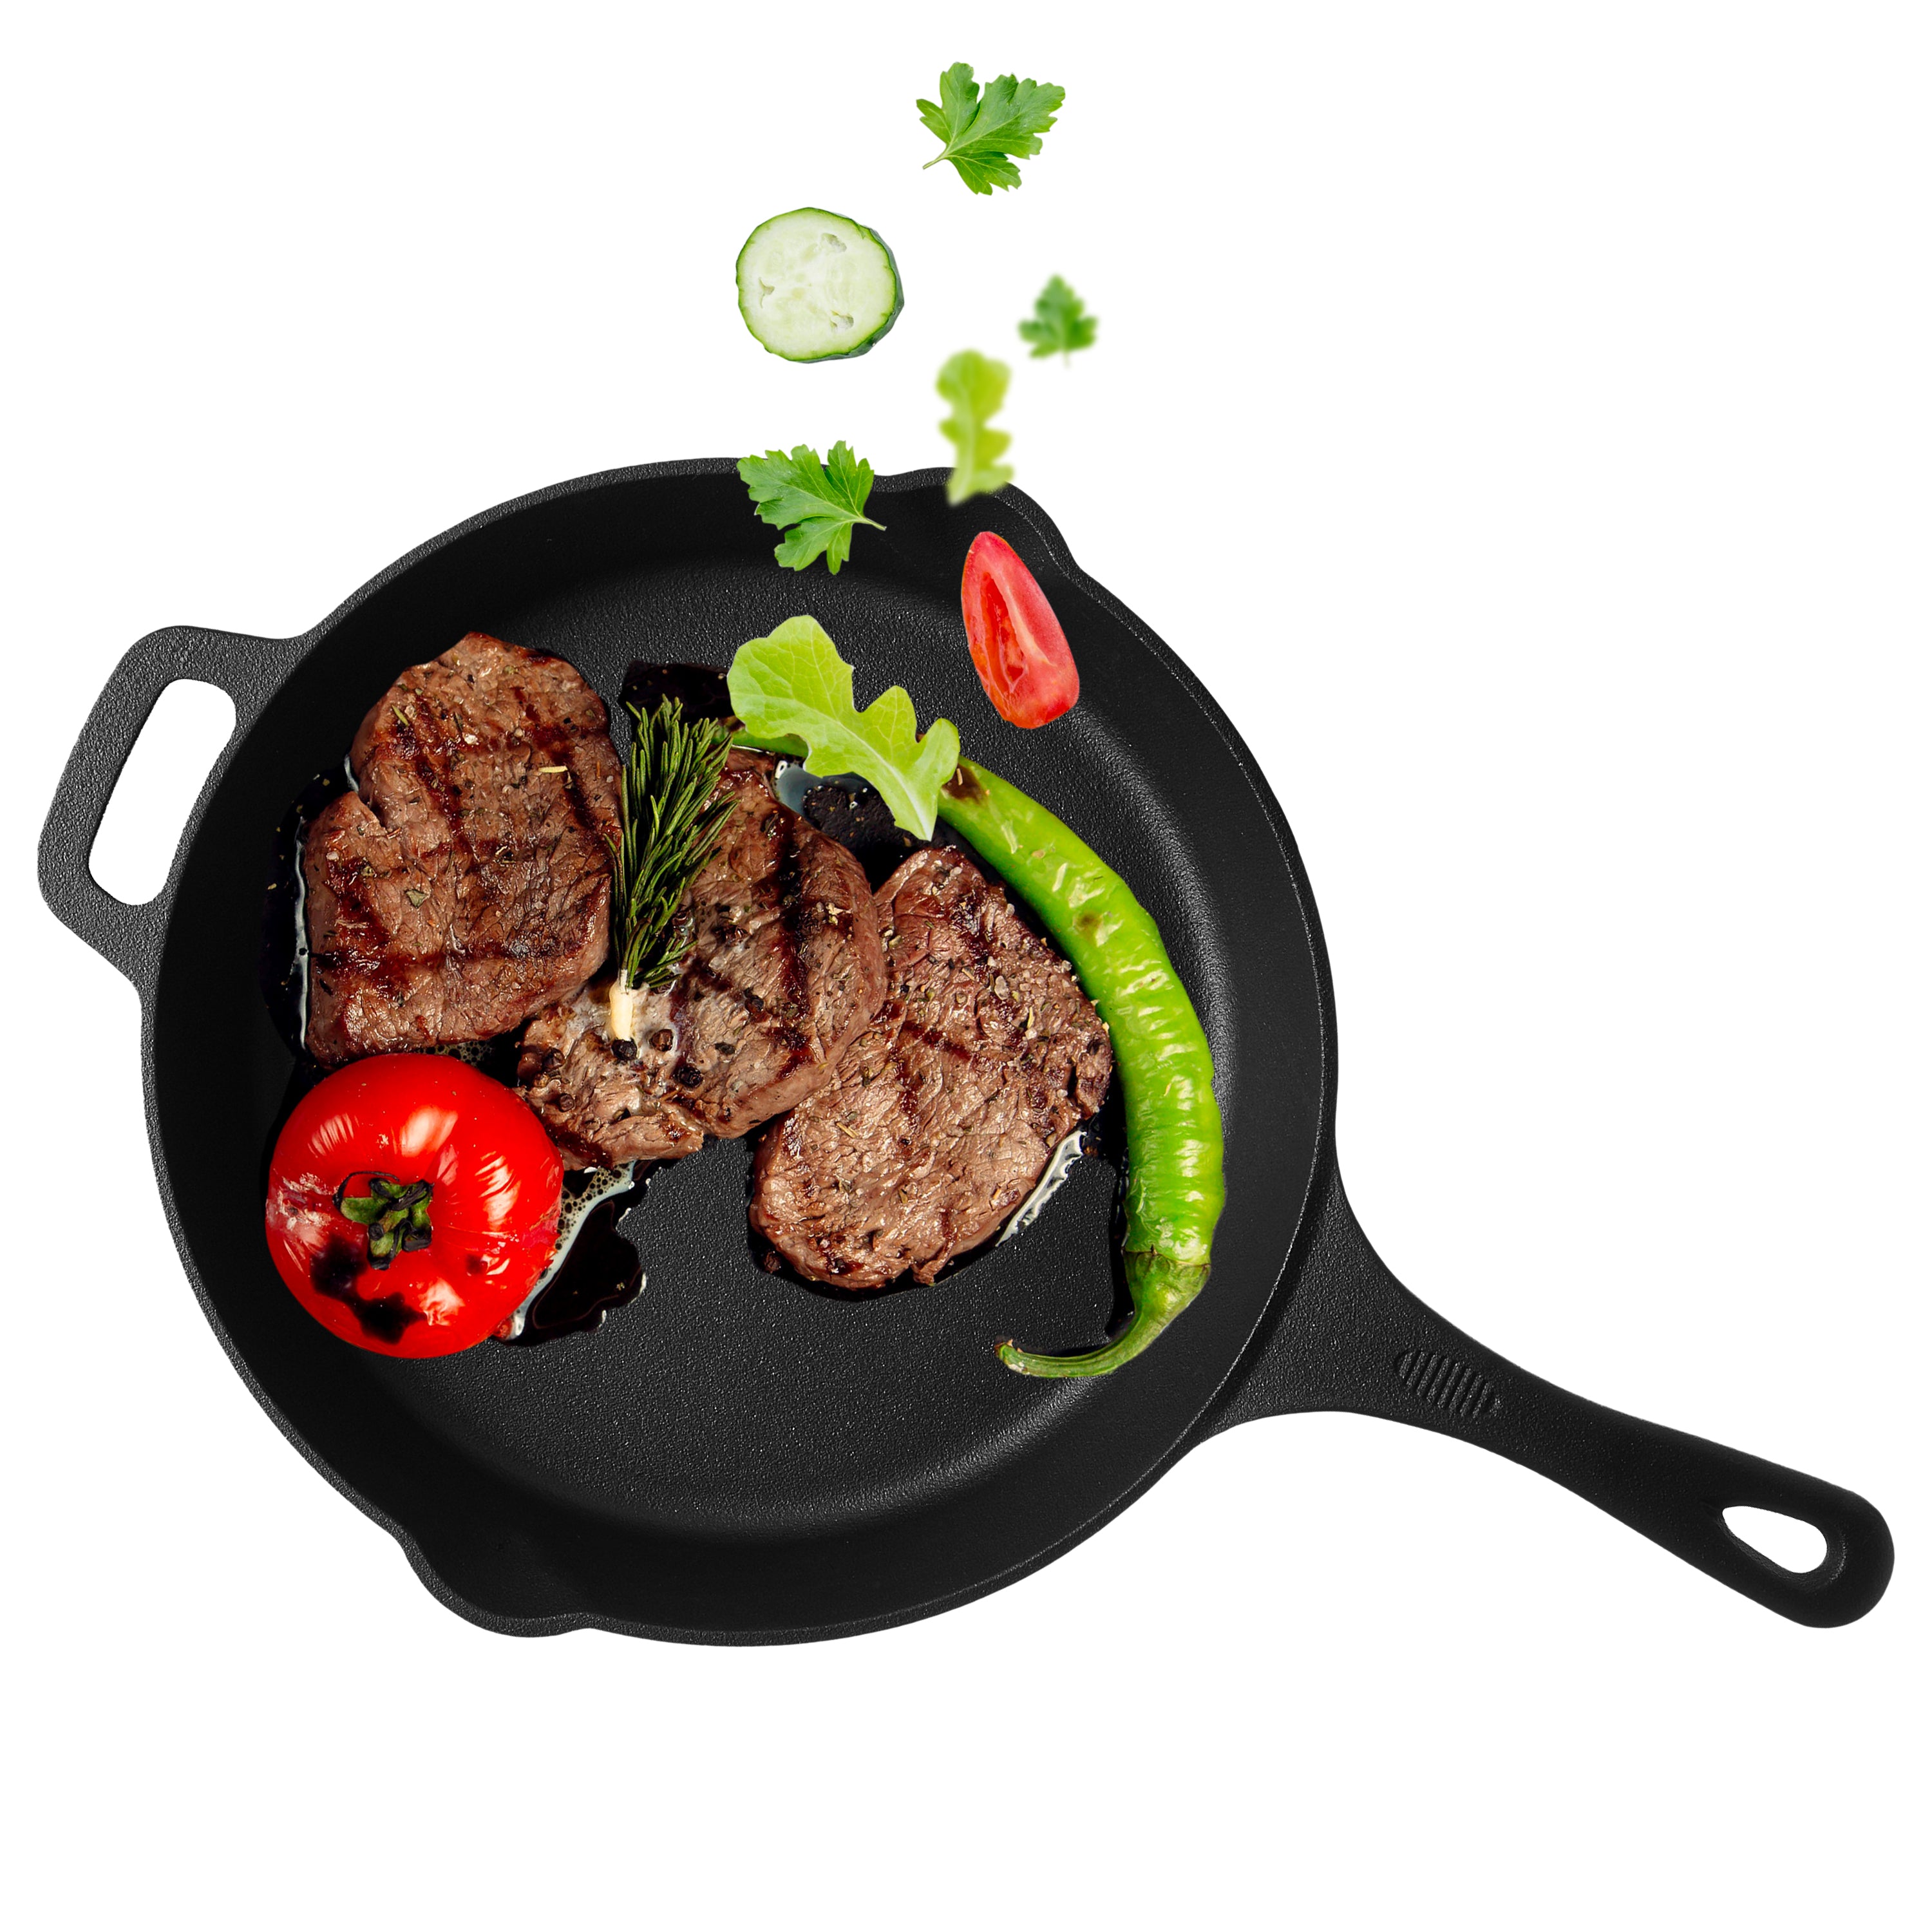 chef best quality cast iron skillet grill pan fryer at best price in pakistan - majestic chef